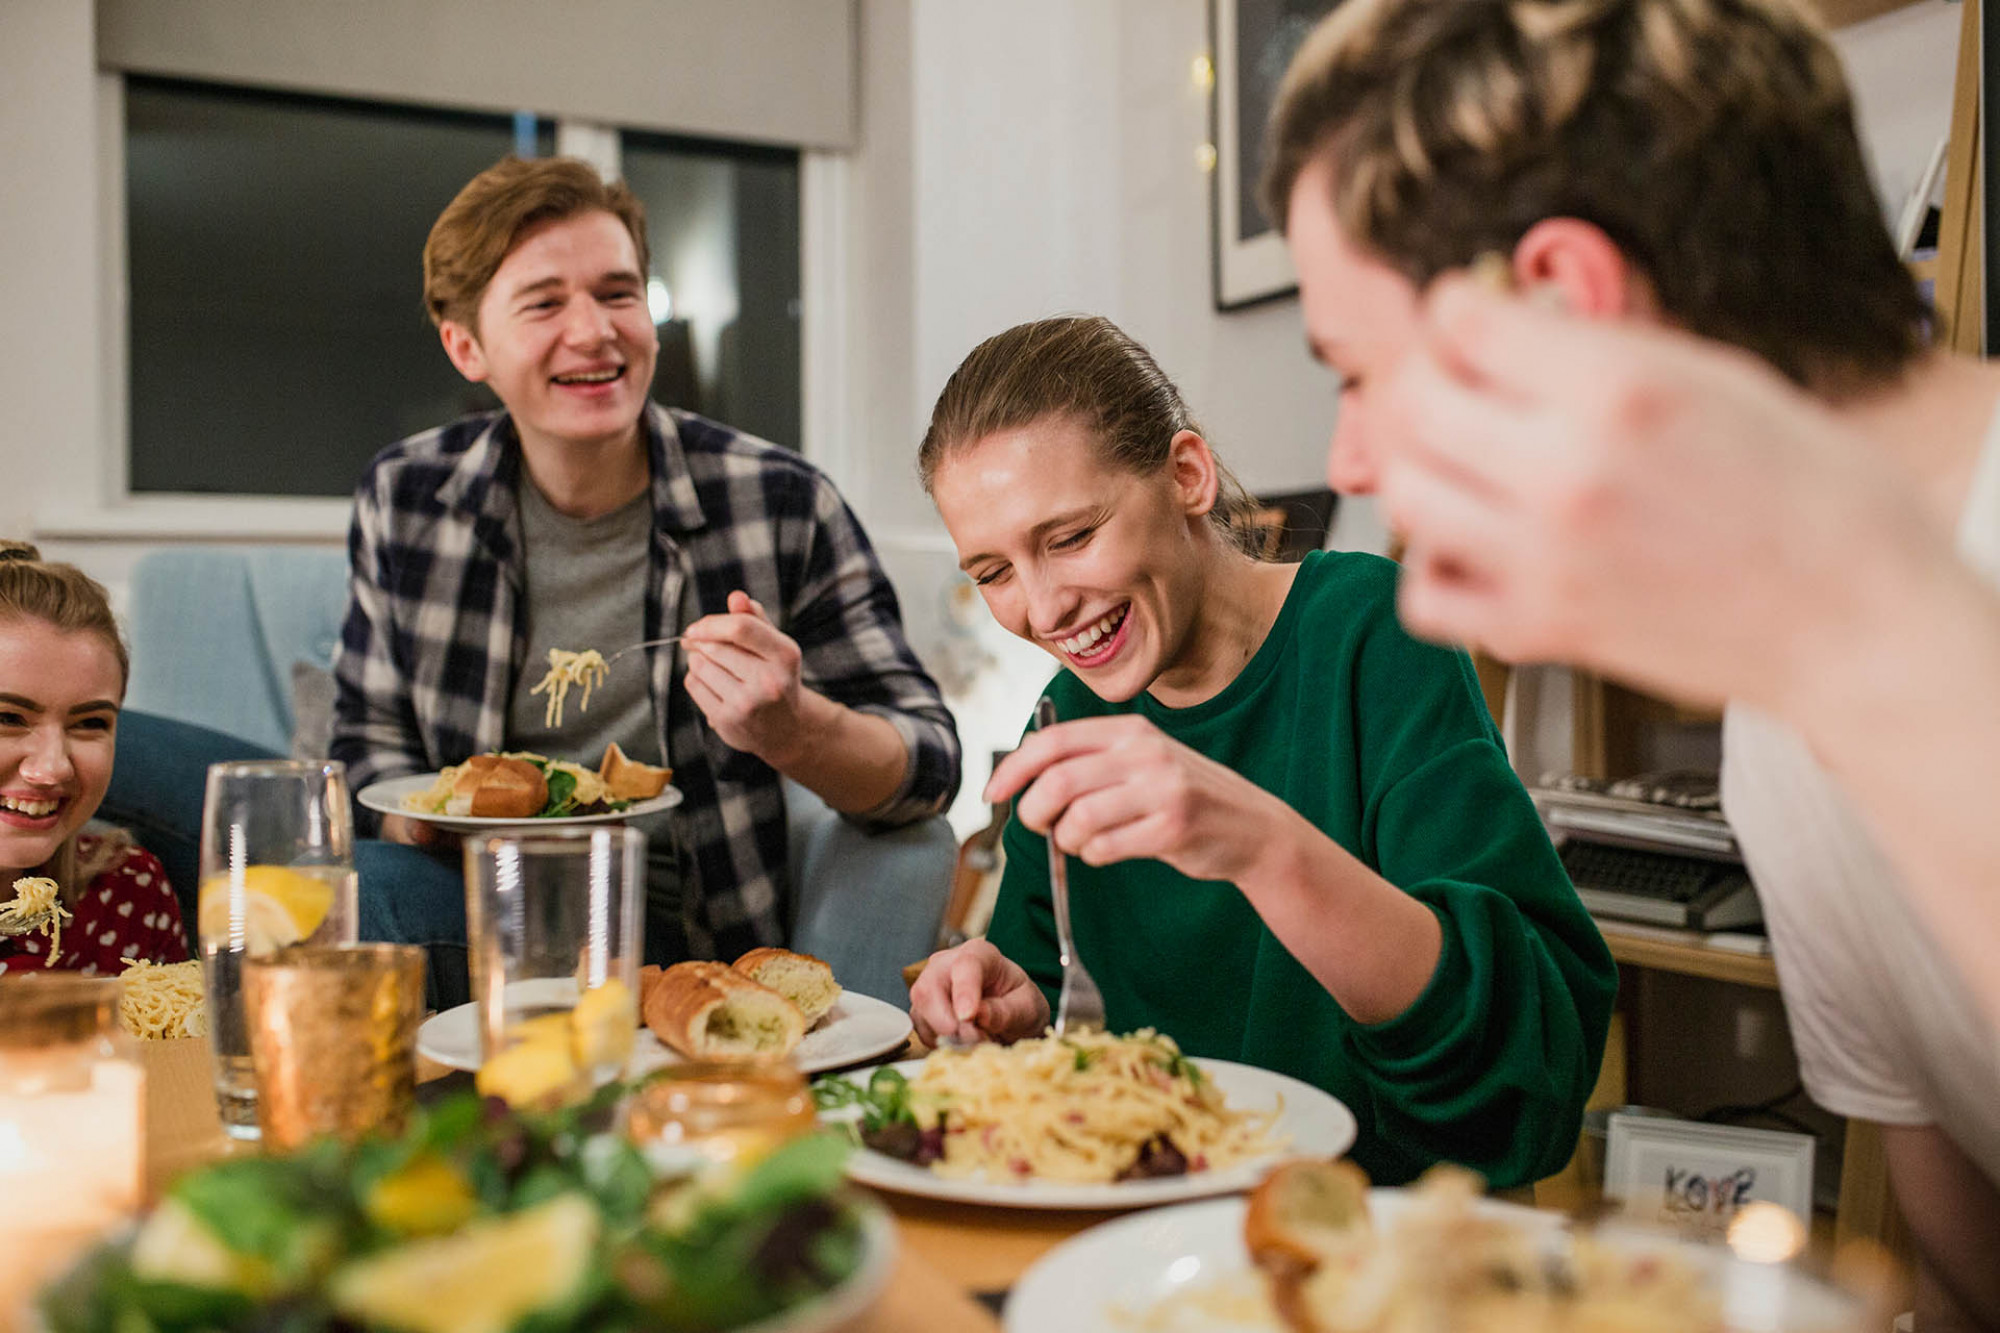 Students laughing eating dinner as group